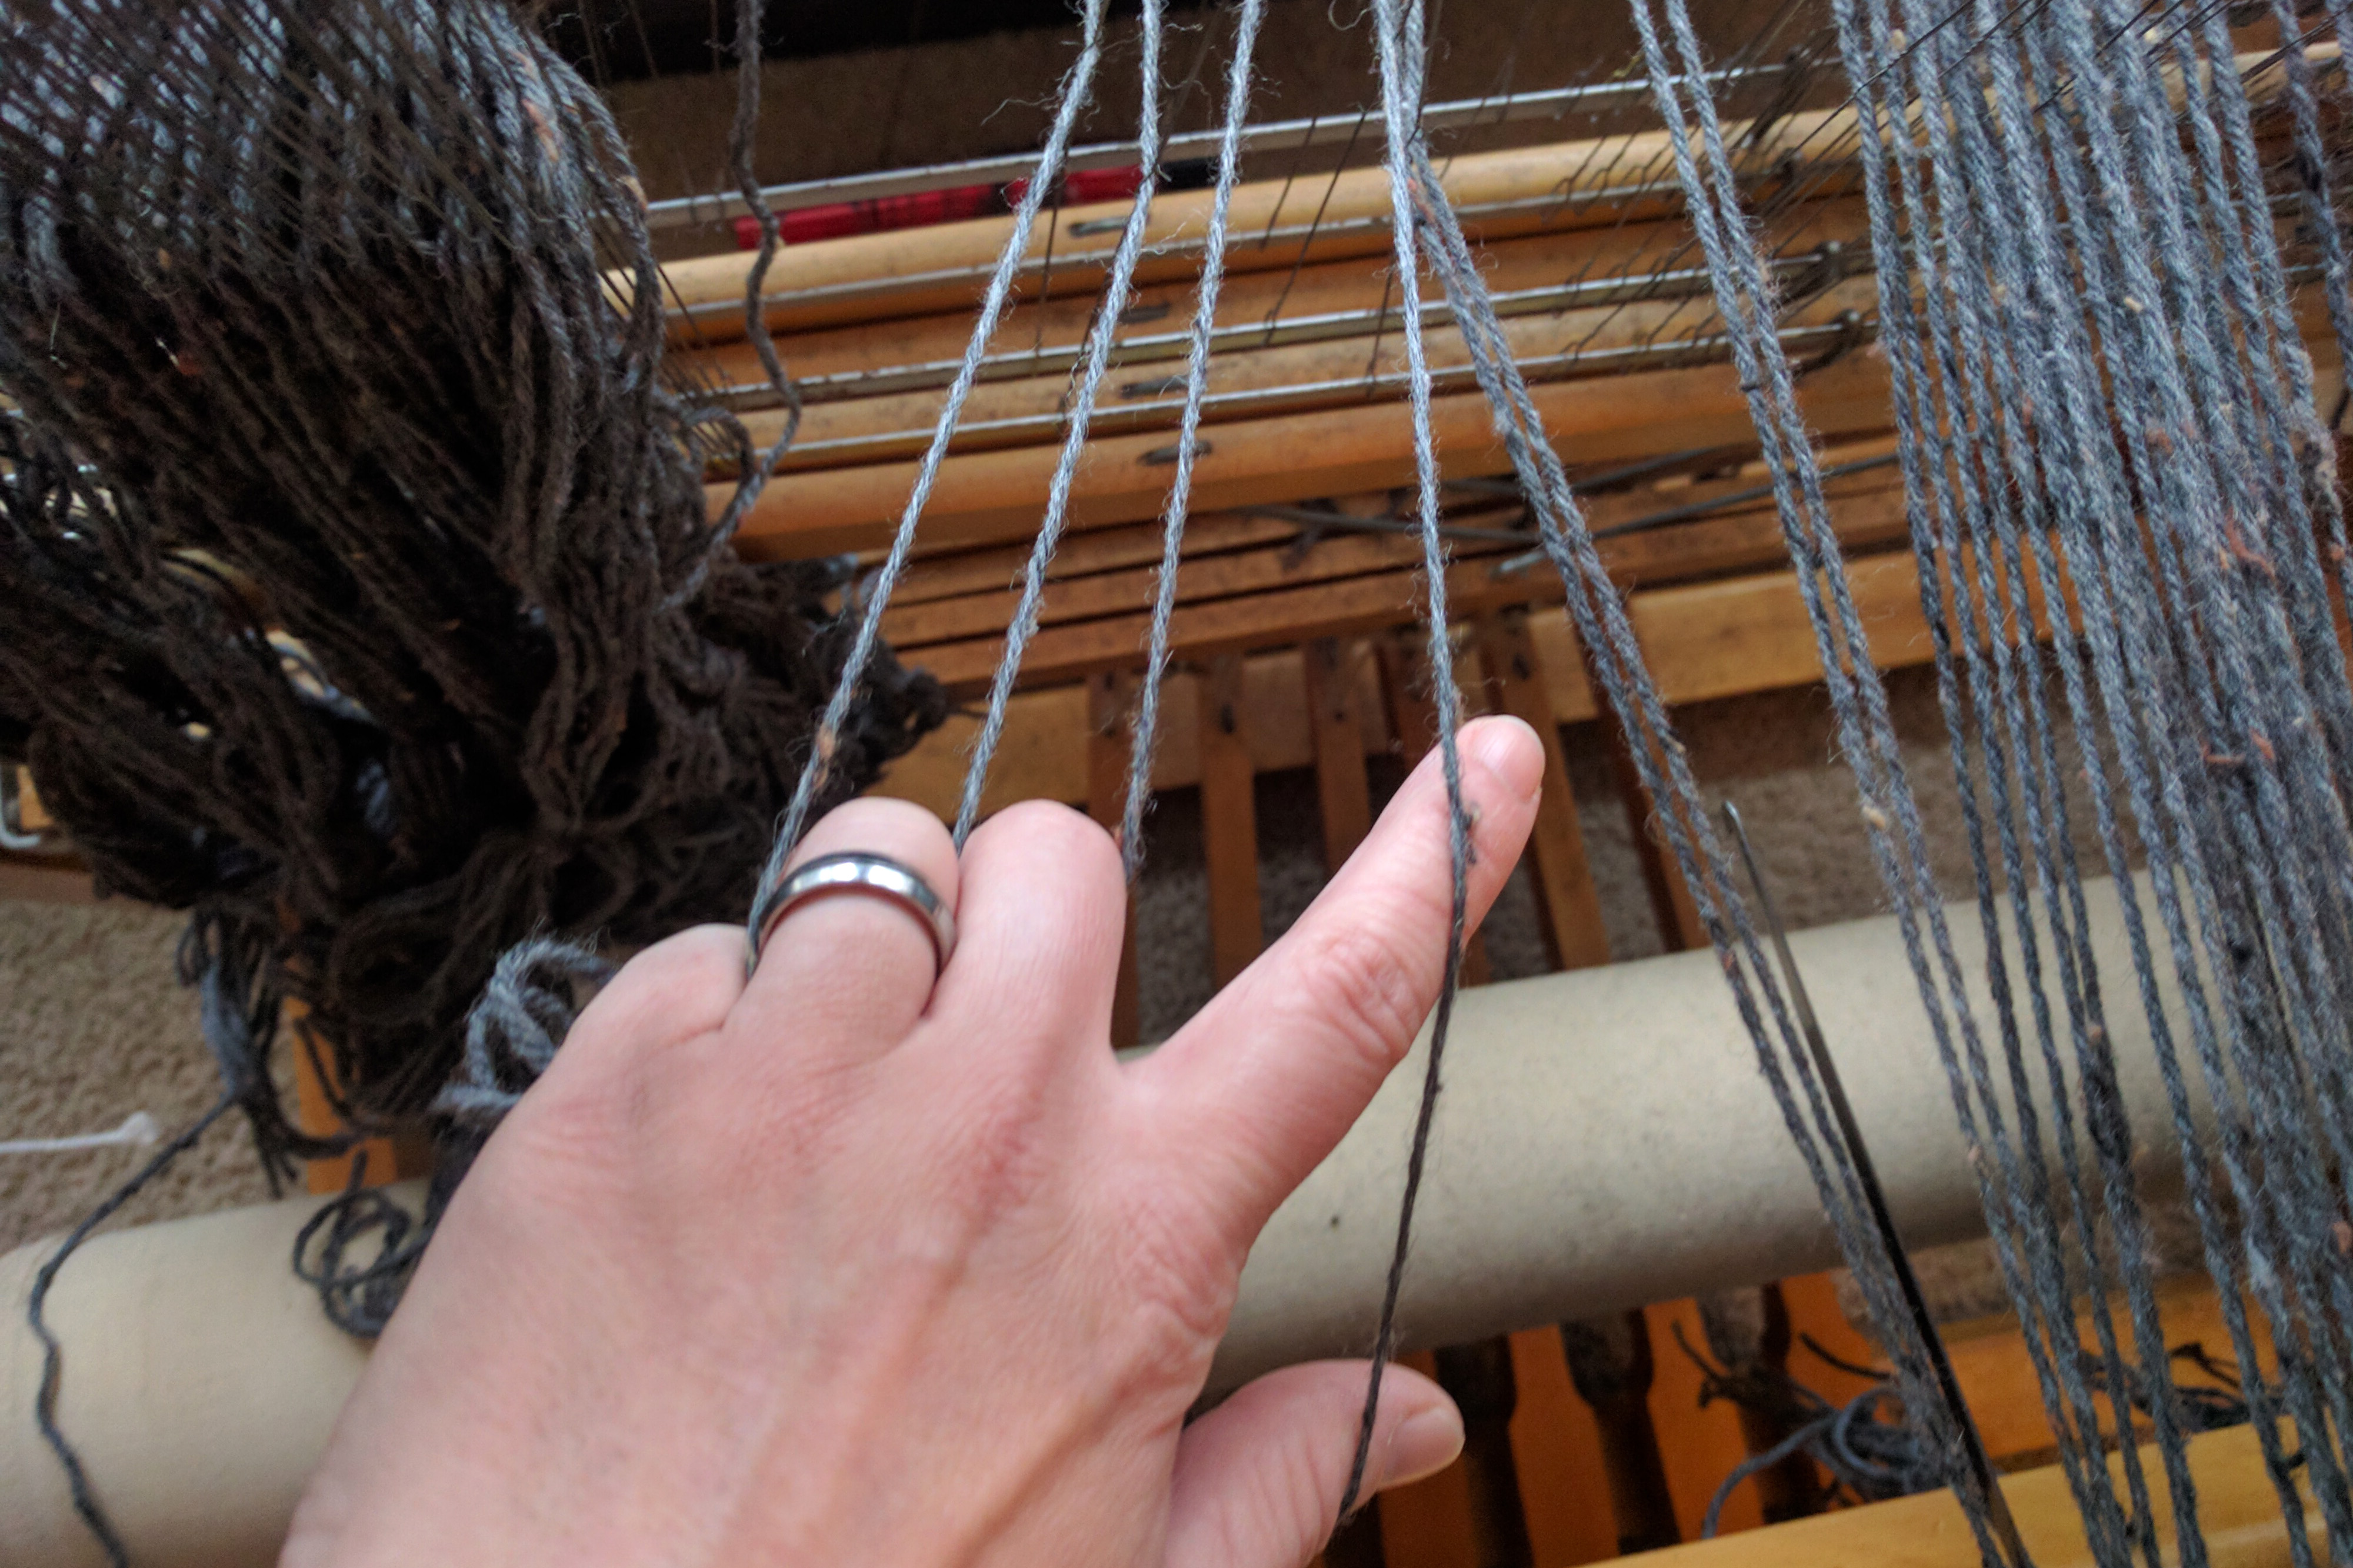 It's important to make sure the ends coming from the heddles go into the reed in the correct order.